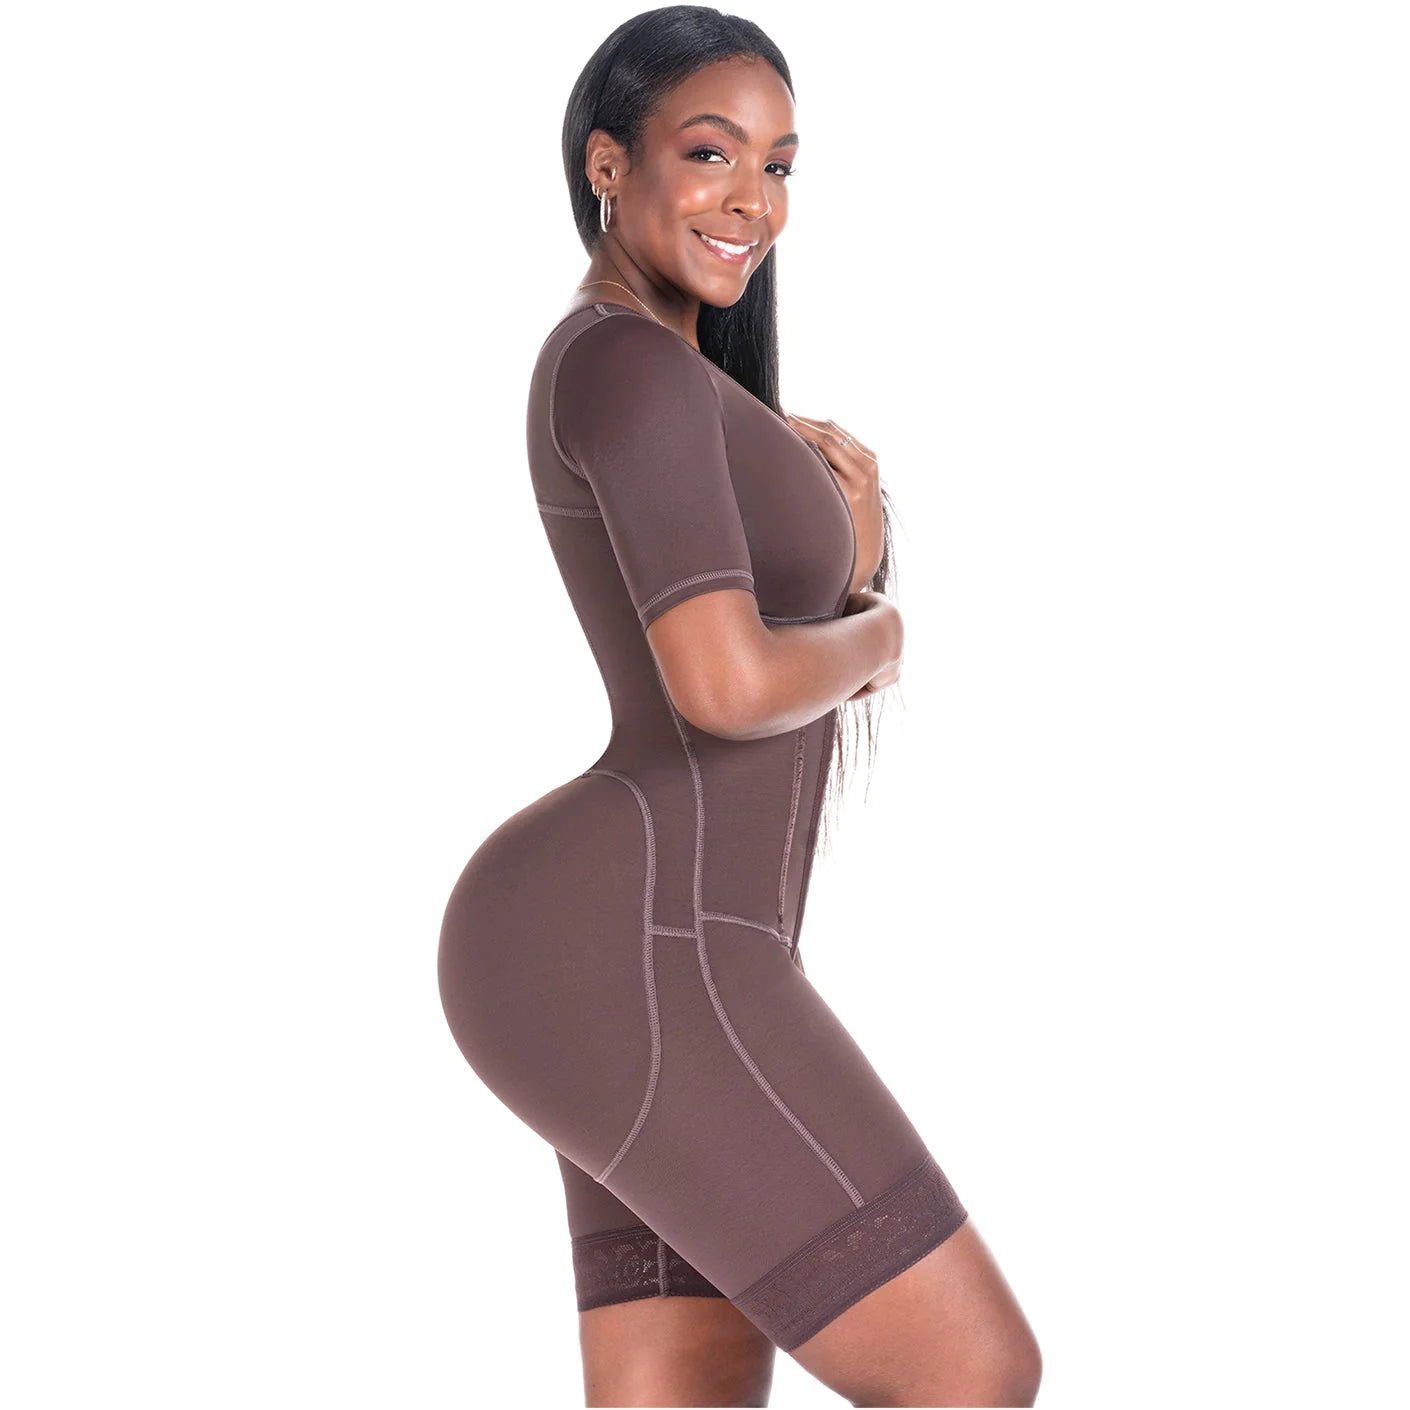 Colombian Compression Garment For Women 938BF | BBL Post Surgery Use | With Sleeves And Built-In Bra | Powernet